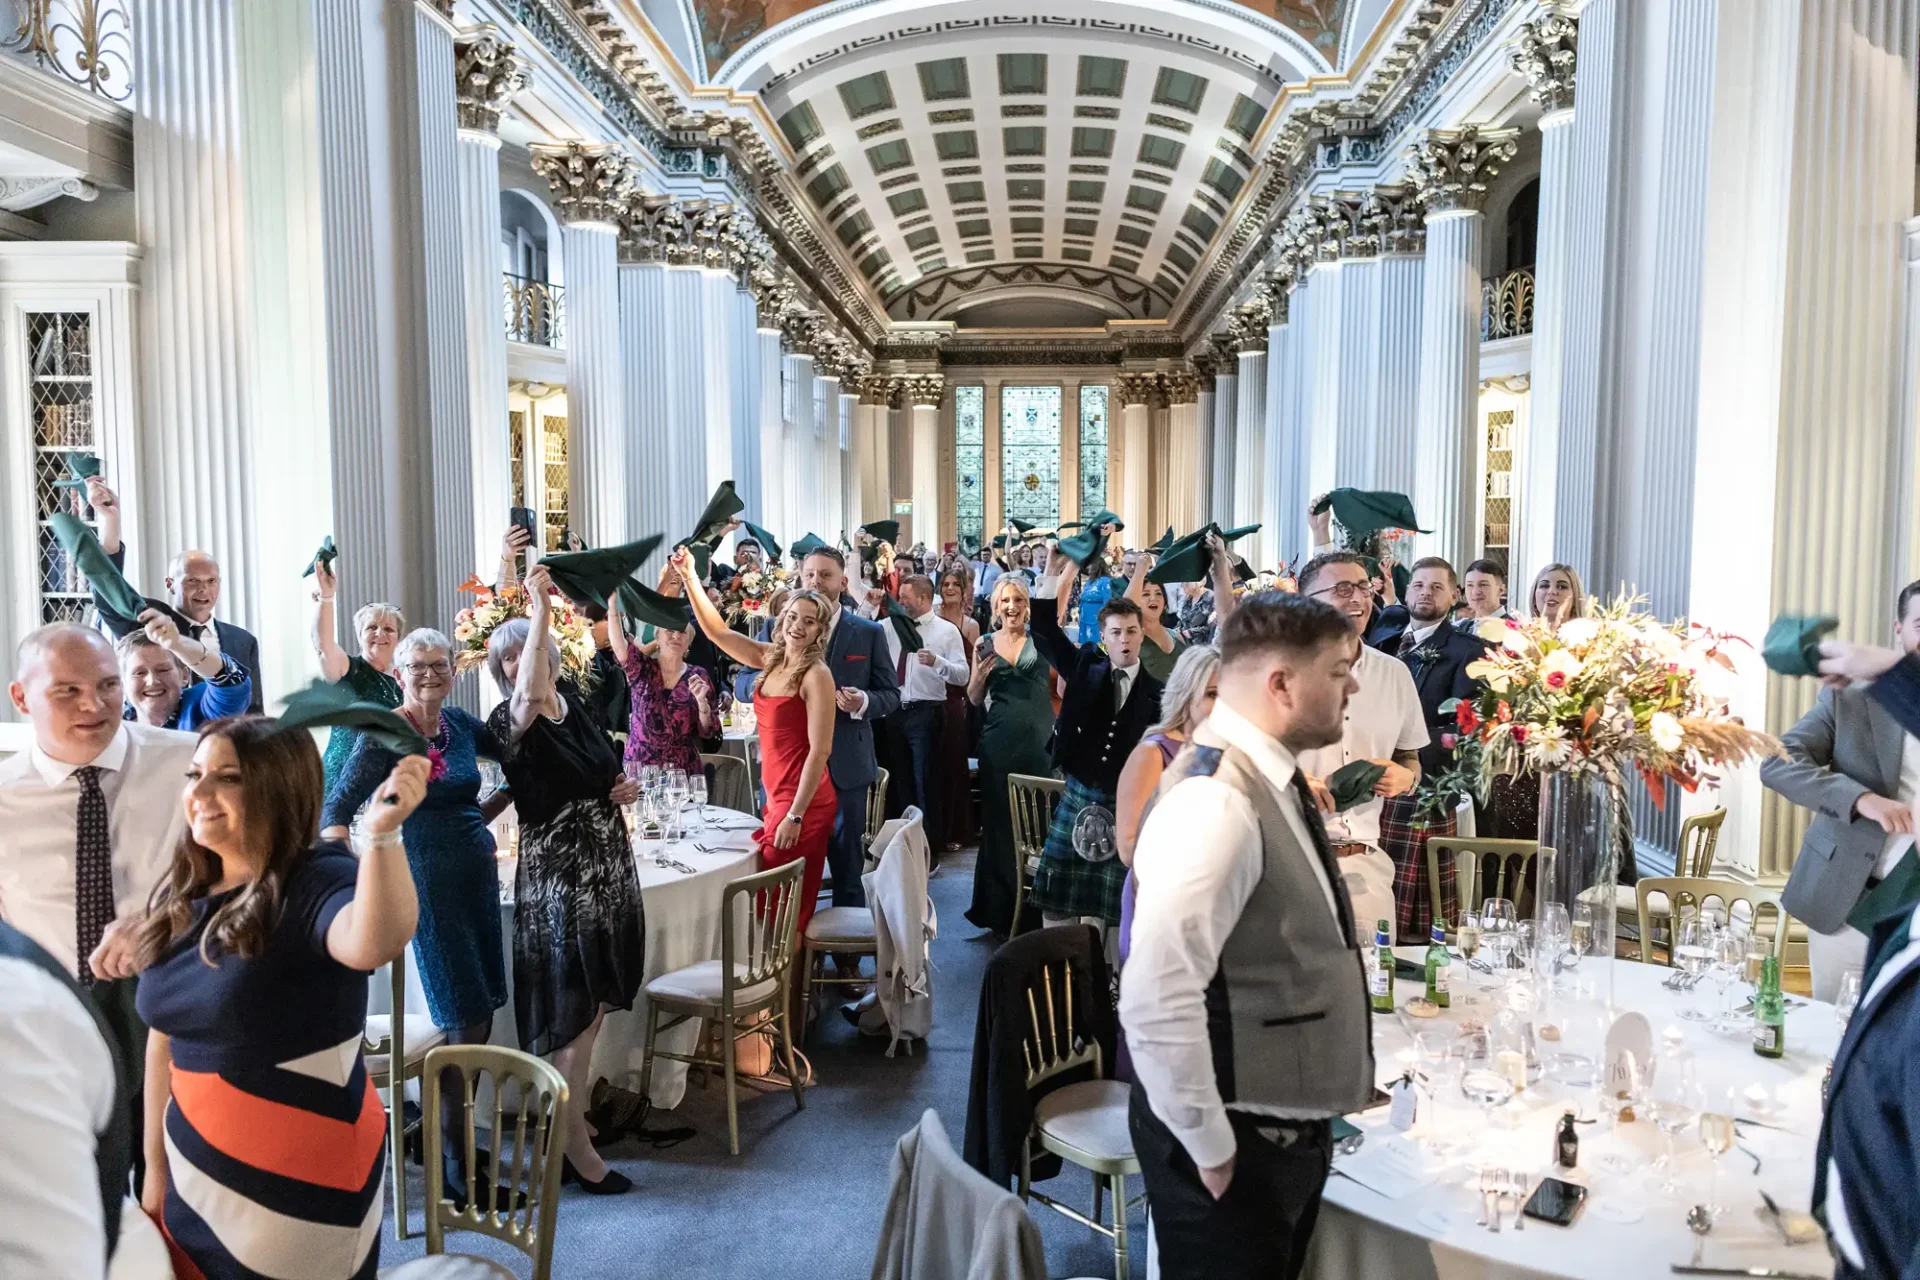 Guests waving napkins at a lively formal dinner in an elegant hall with classical columns and arched ceiling.